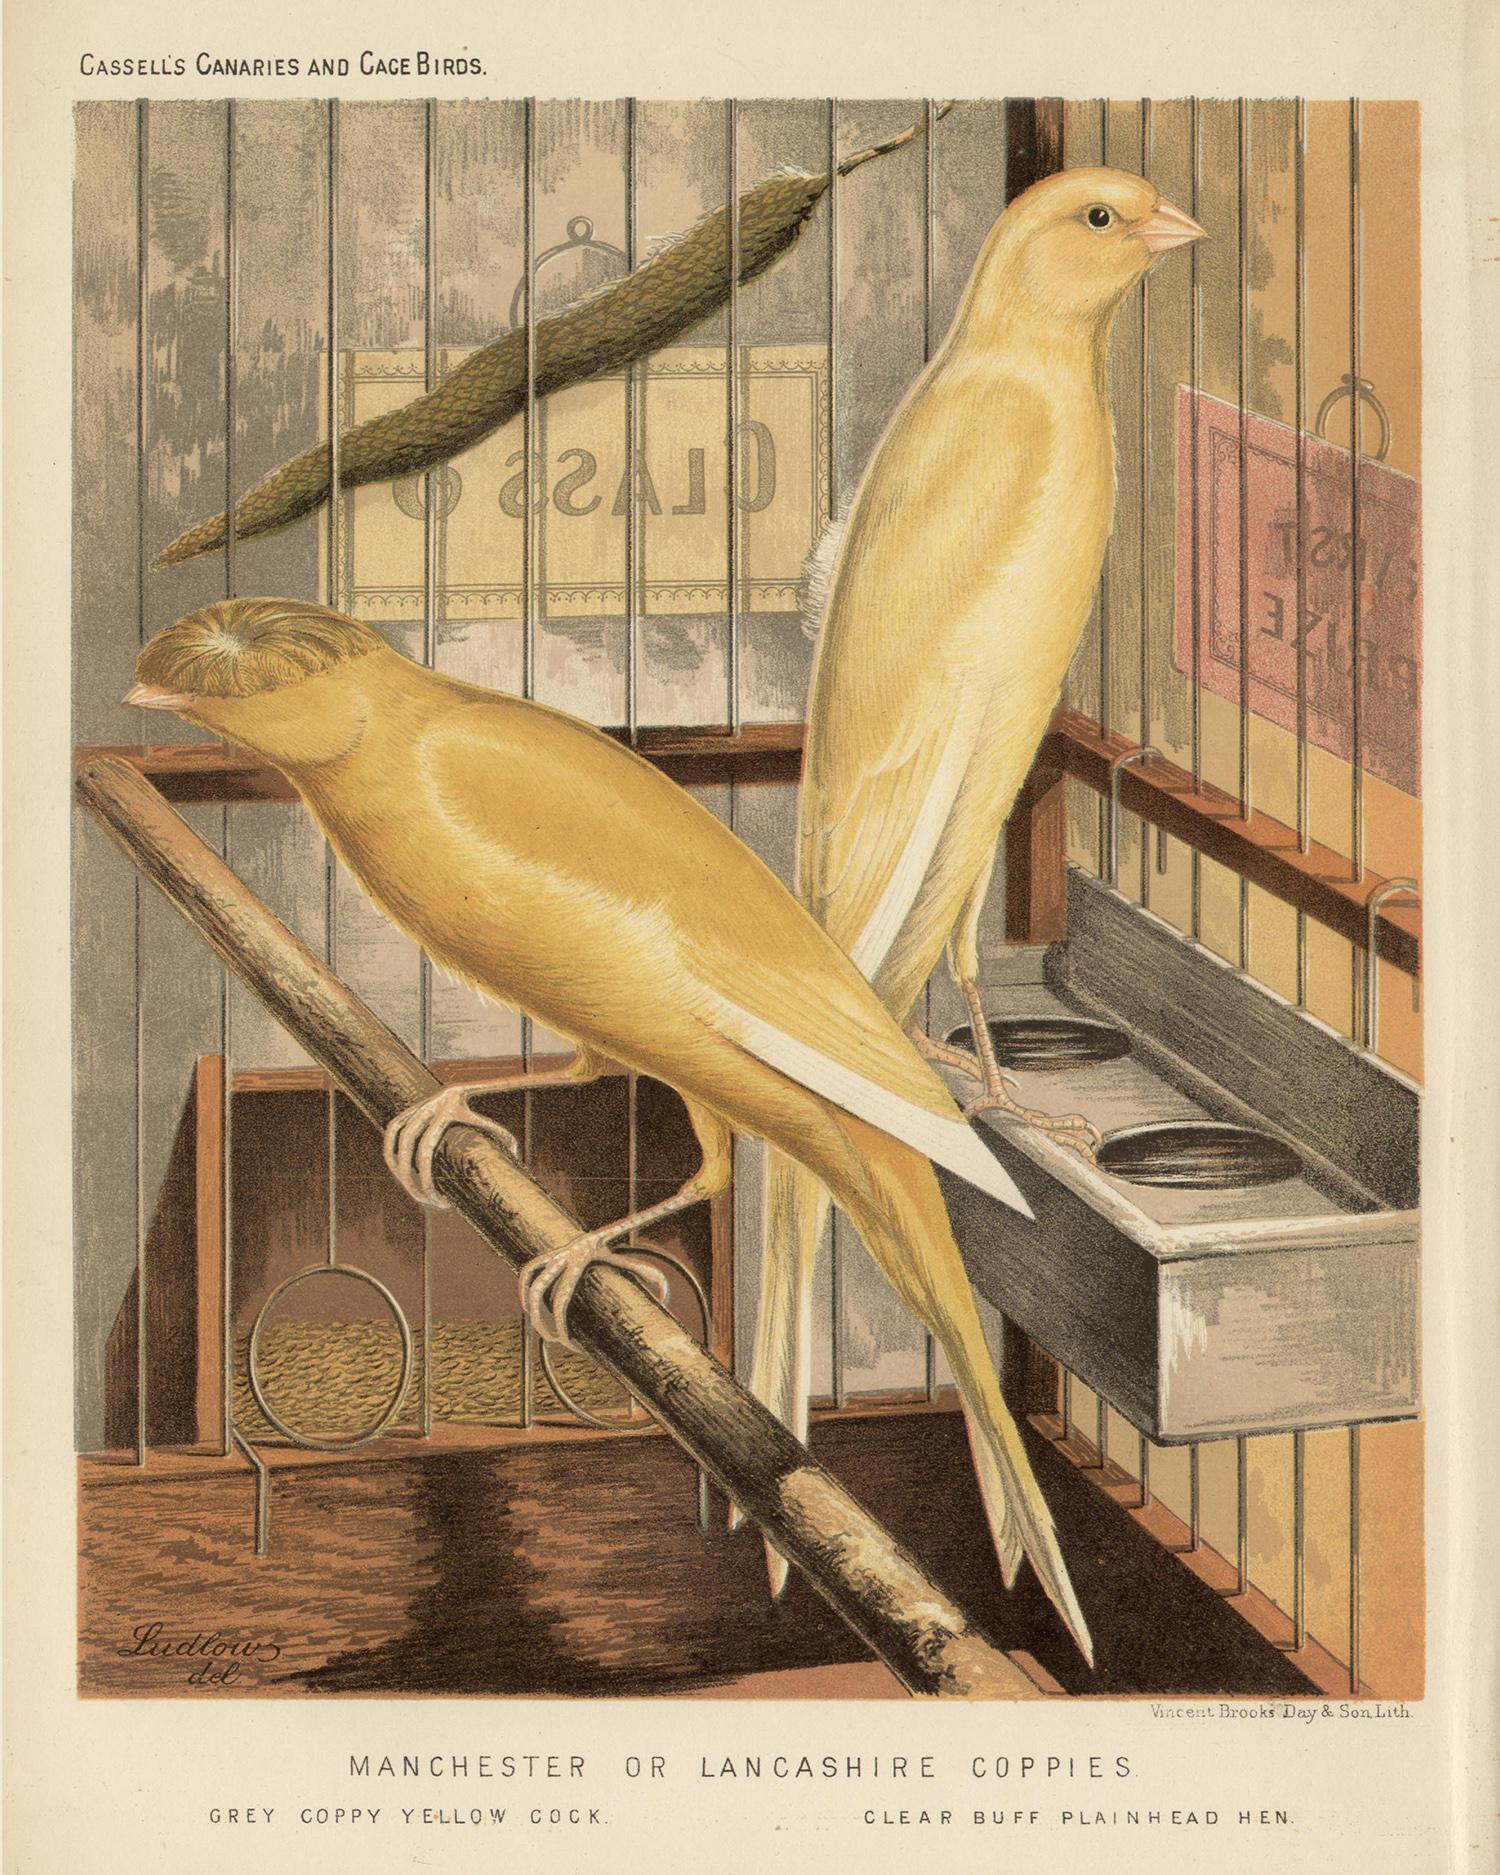 Manchester or Lancashire Coppies, antique canary chromolithograph print, 1880